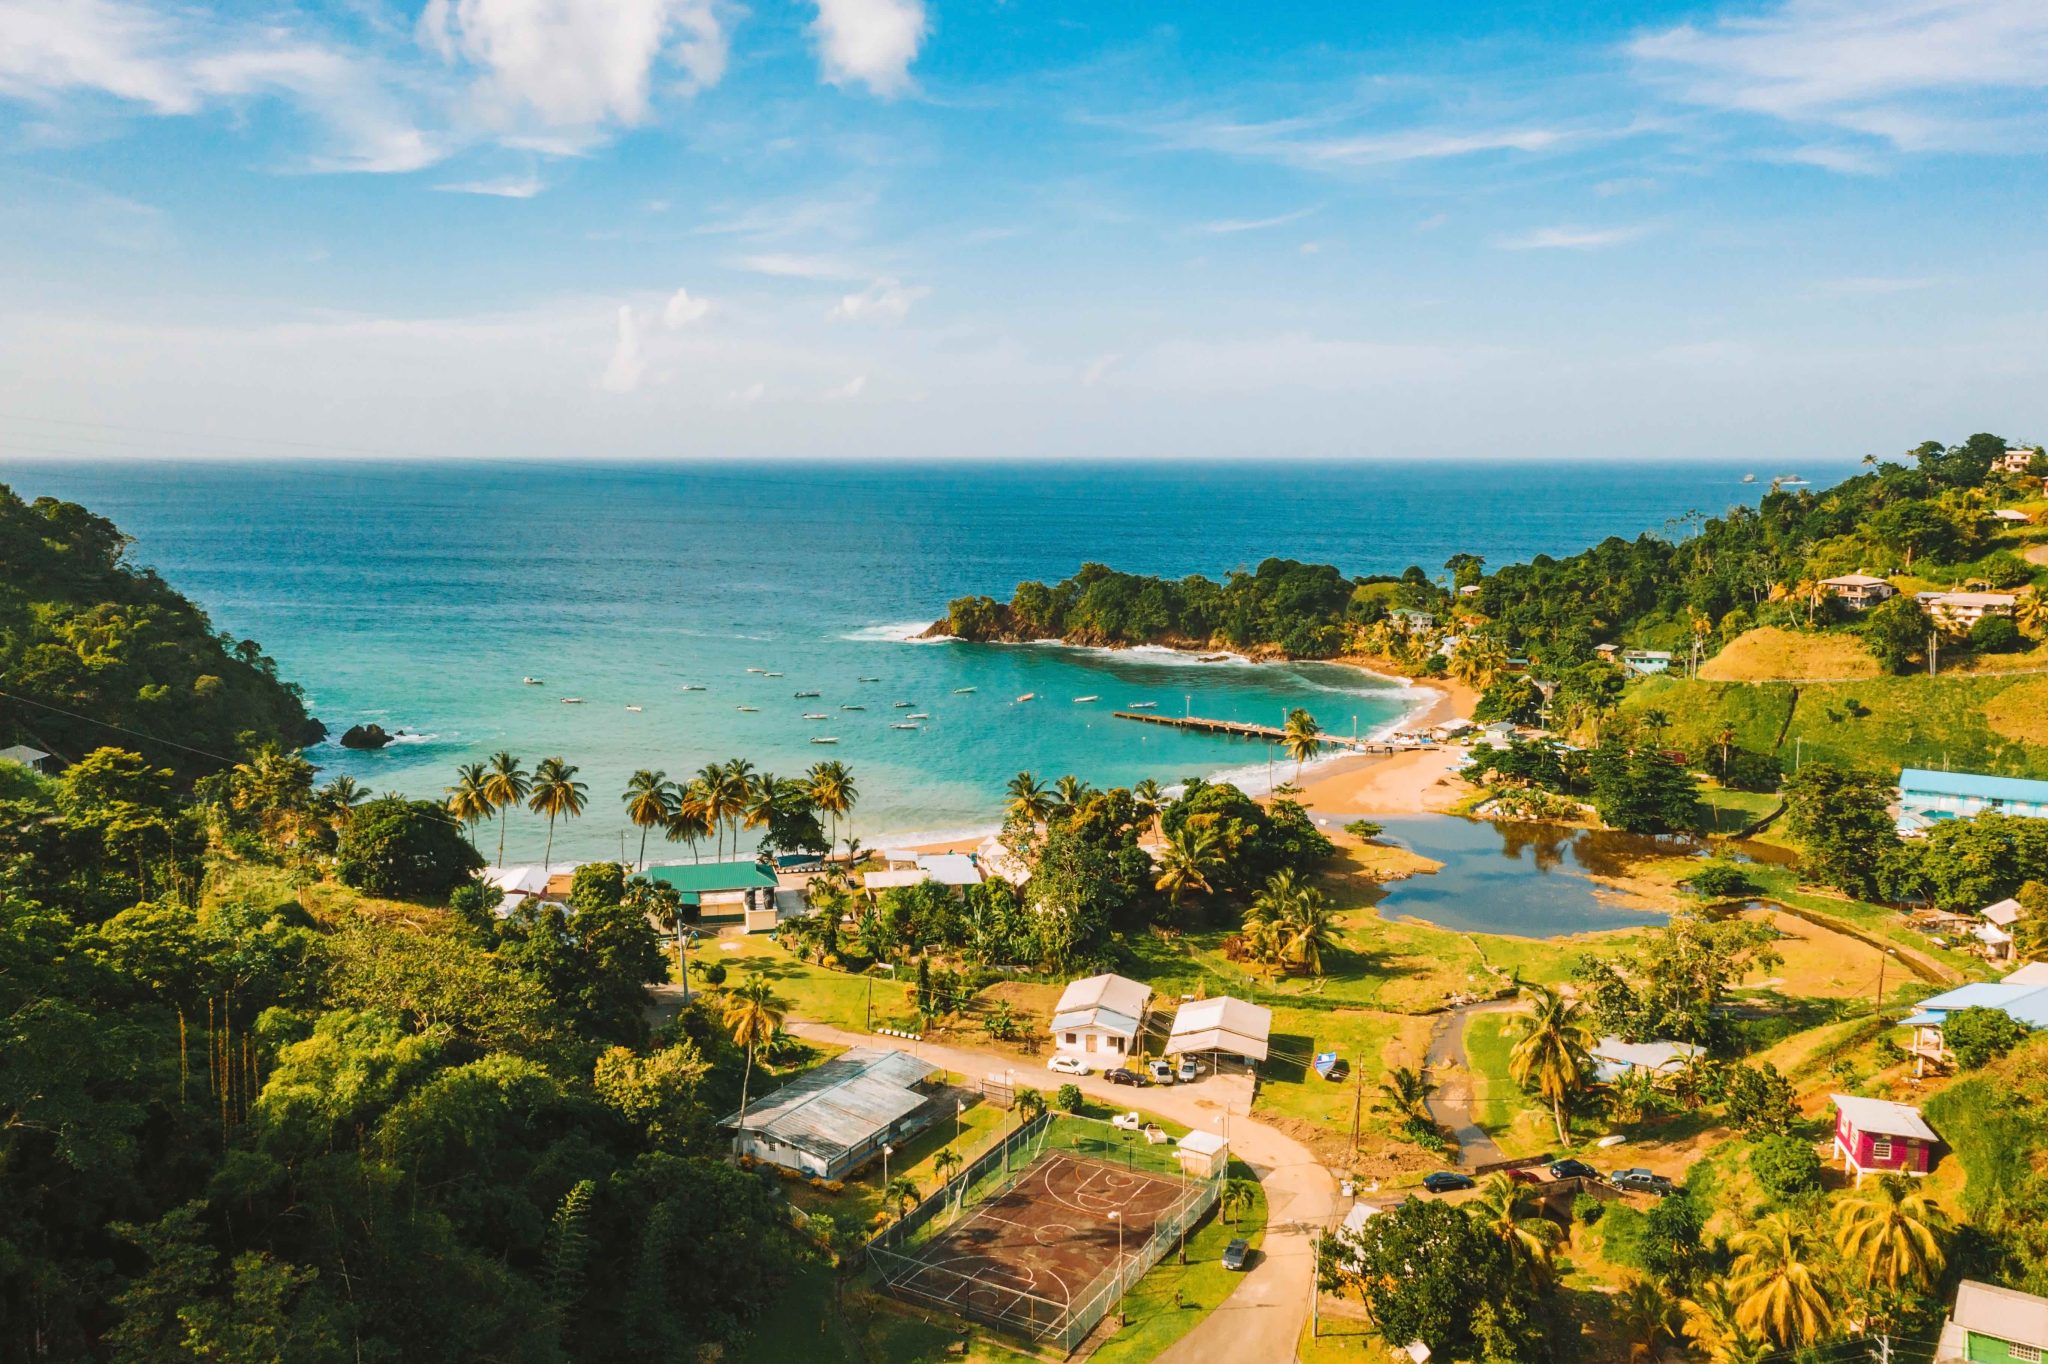 The Best of Barbados